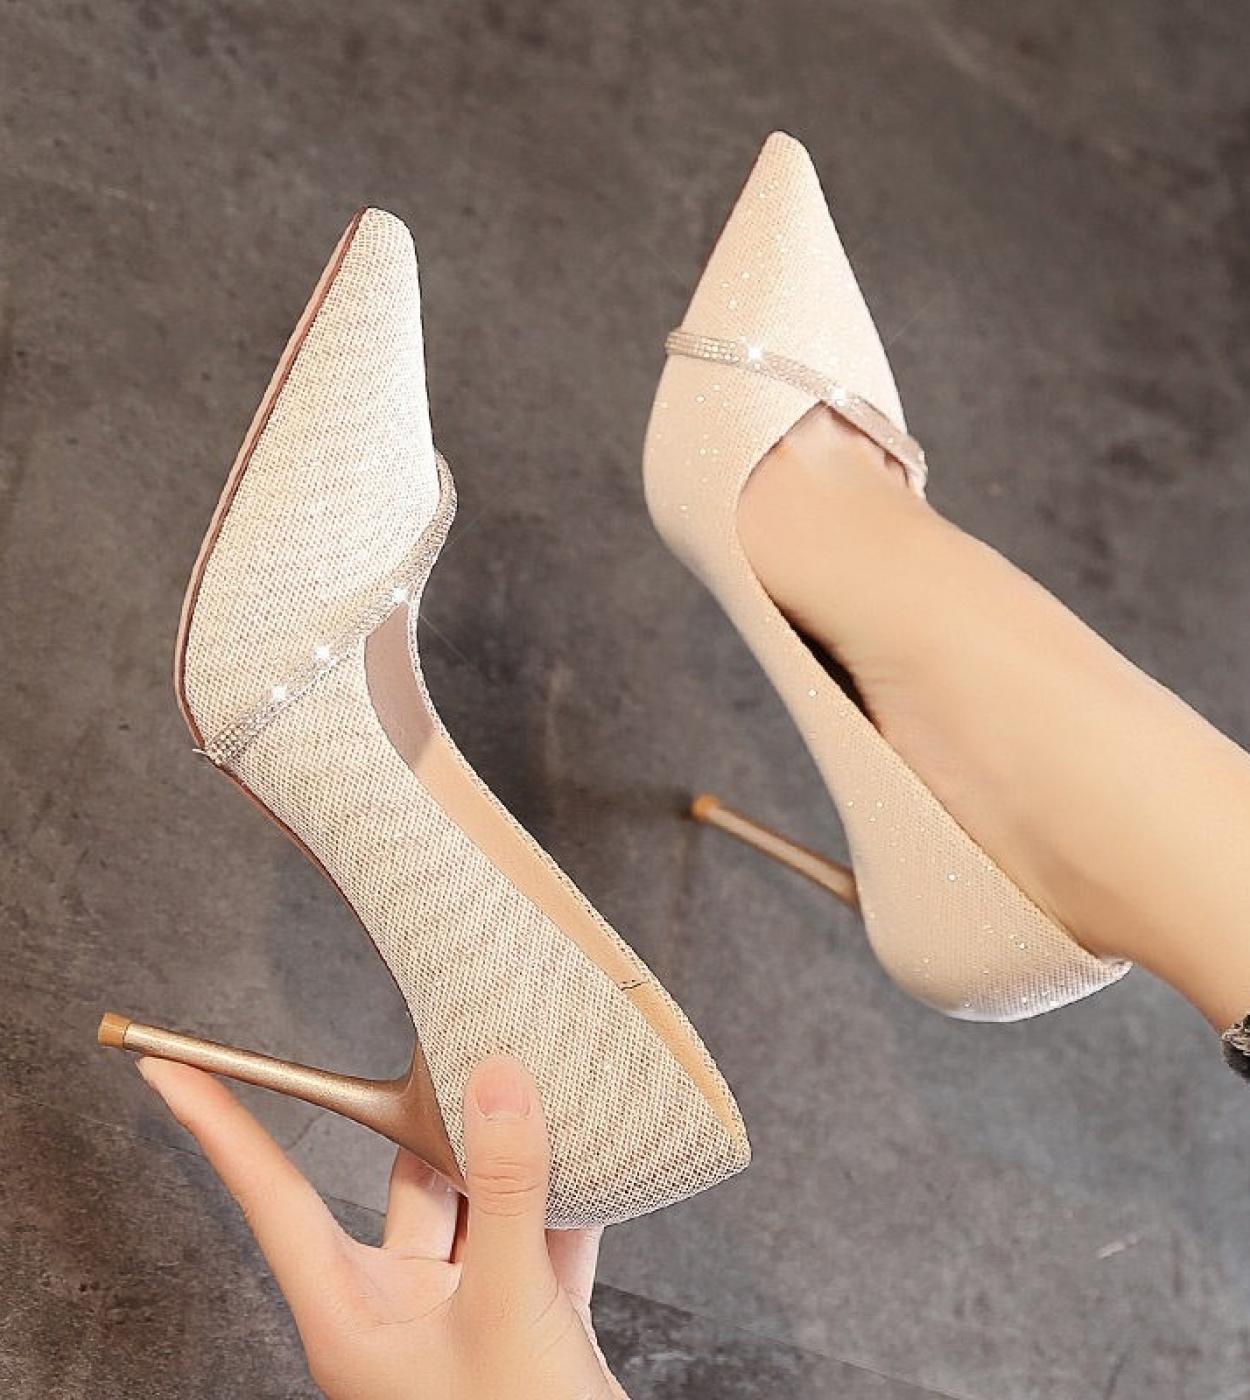 Suede High Heels Women Stiletto Pump Single Professional Ol Work Shoes Pointed Toe  Party Wedding  Pumps